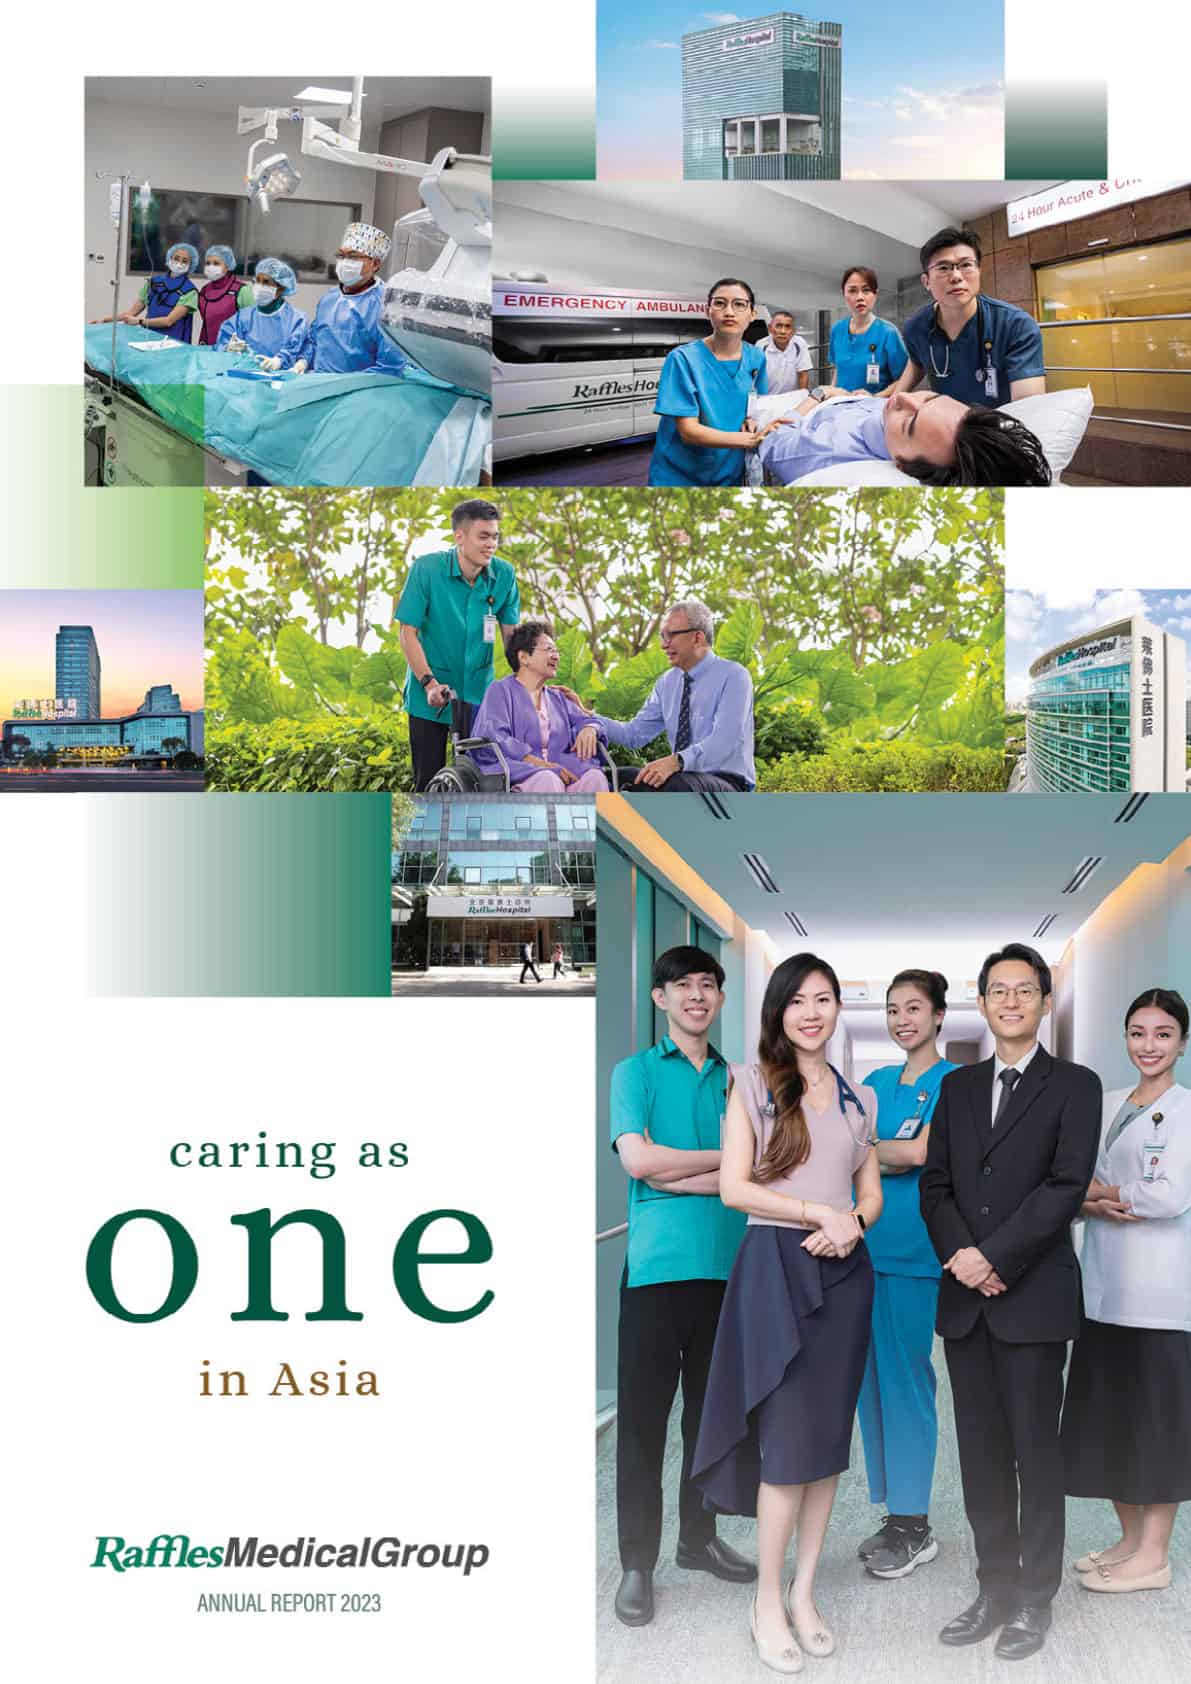 raffles medical group annual report 2023 - caring as one in asia